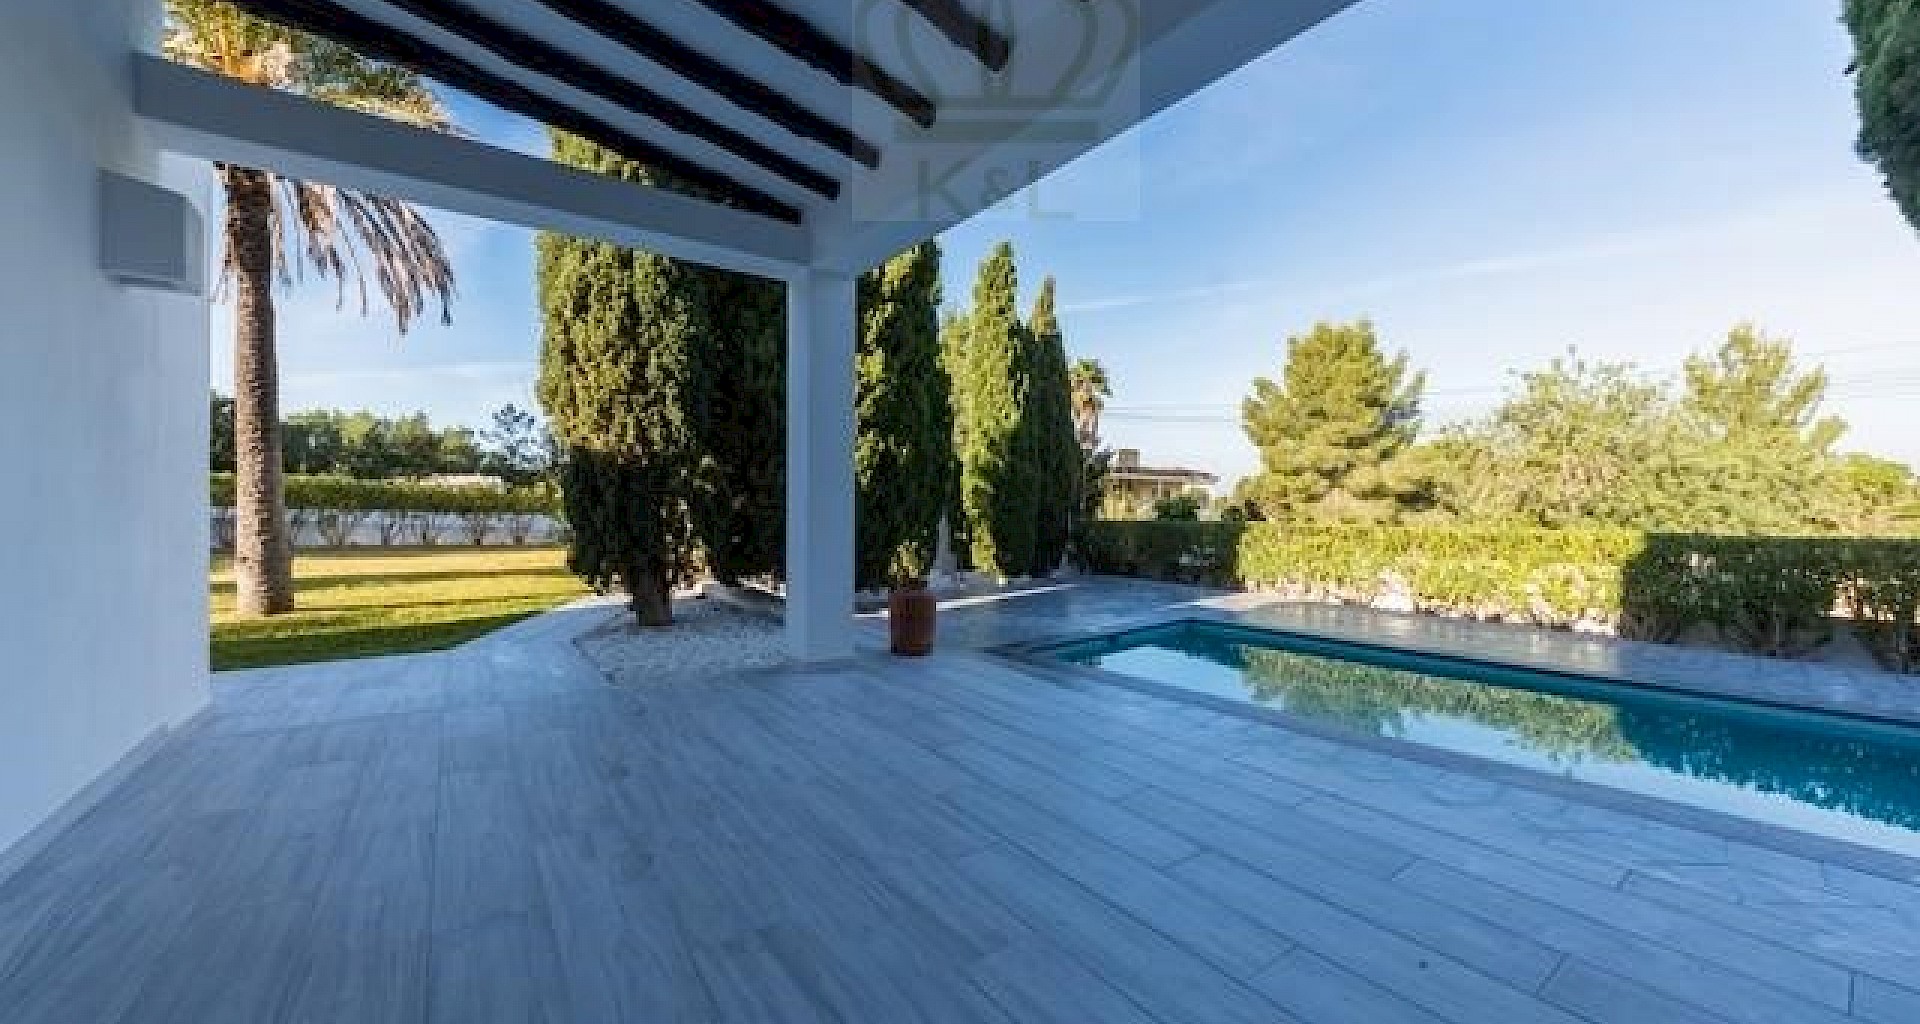 KROHN & LUEDEMANN Completely renovated house in Ibiza with pool and lots of privacy Benimussa (10)